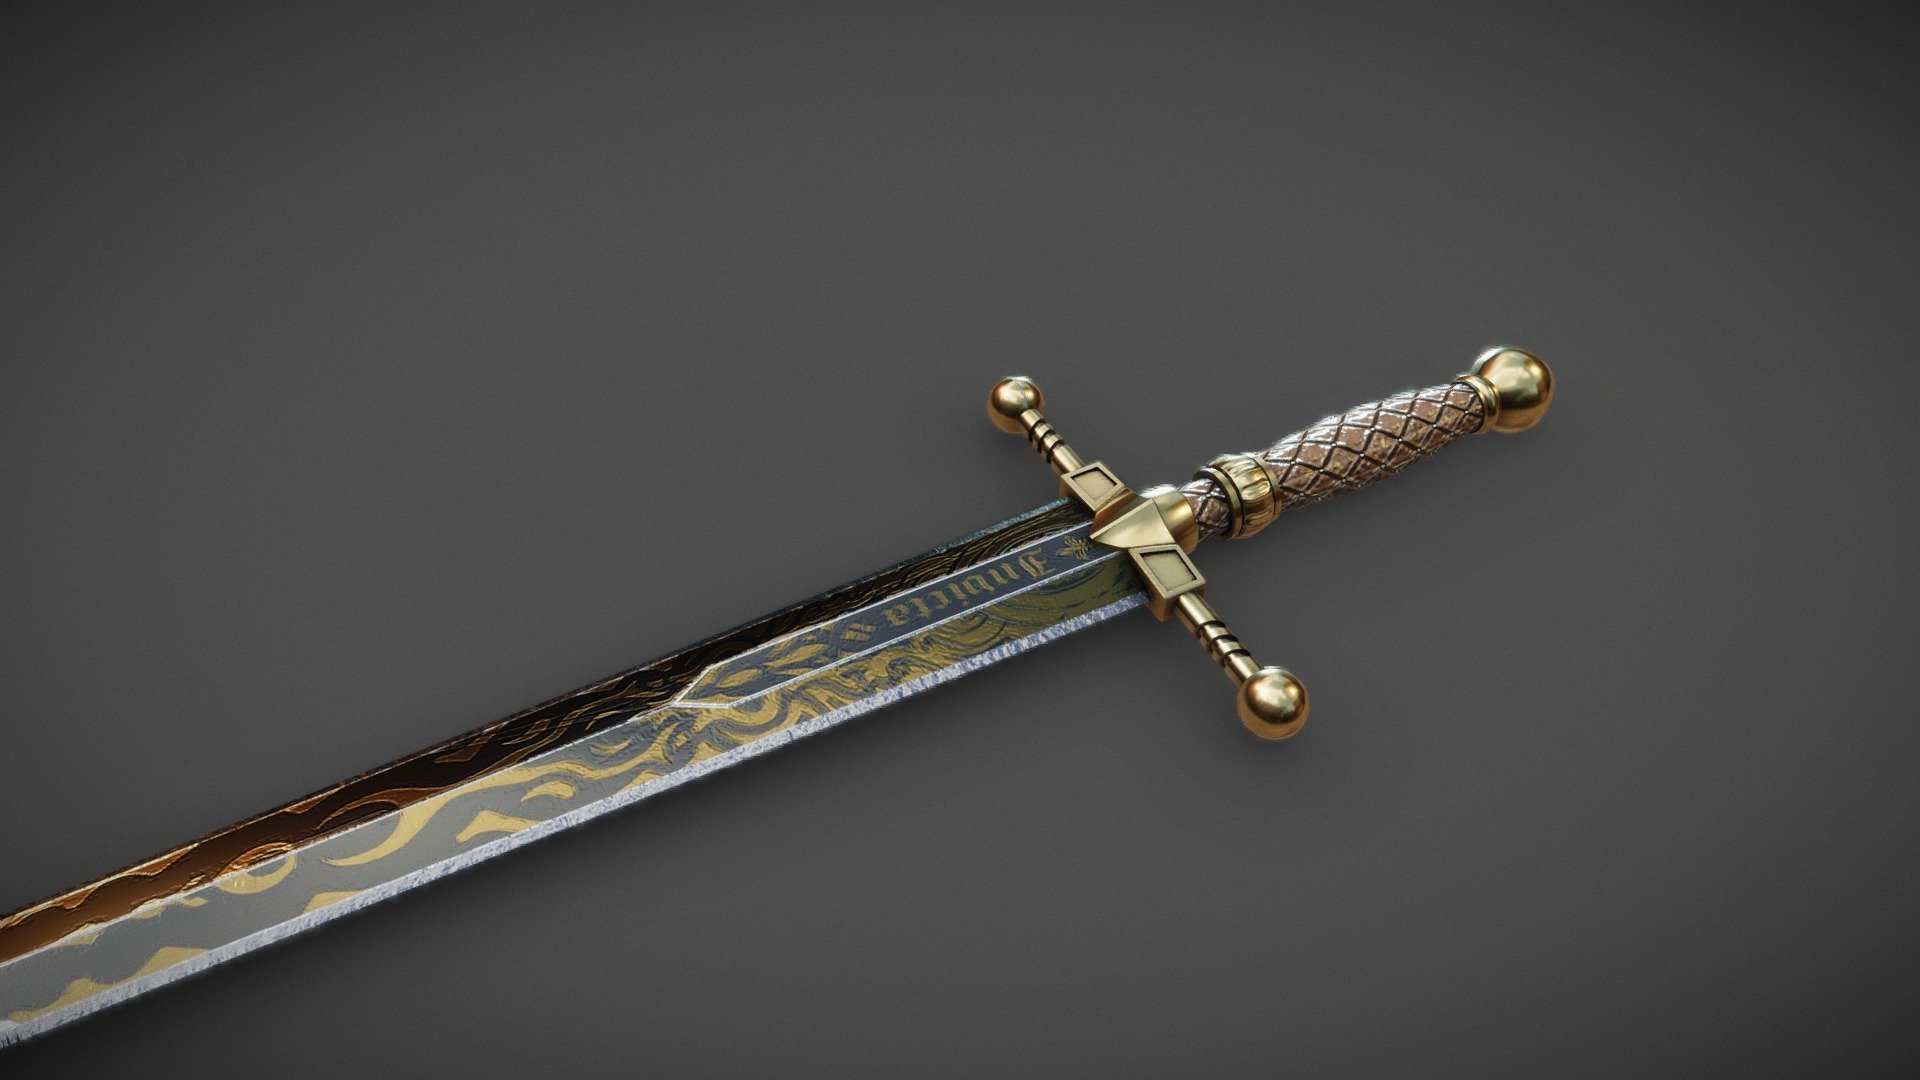 A quick model of a sword that i made as a mod for blade and sorcery. Based on the concept by Guillem Daudén 3d model